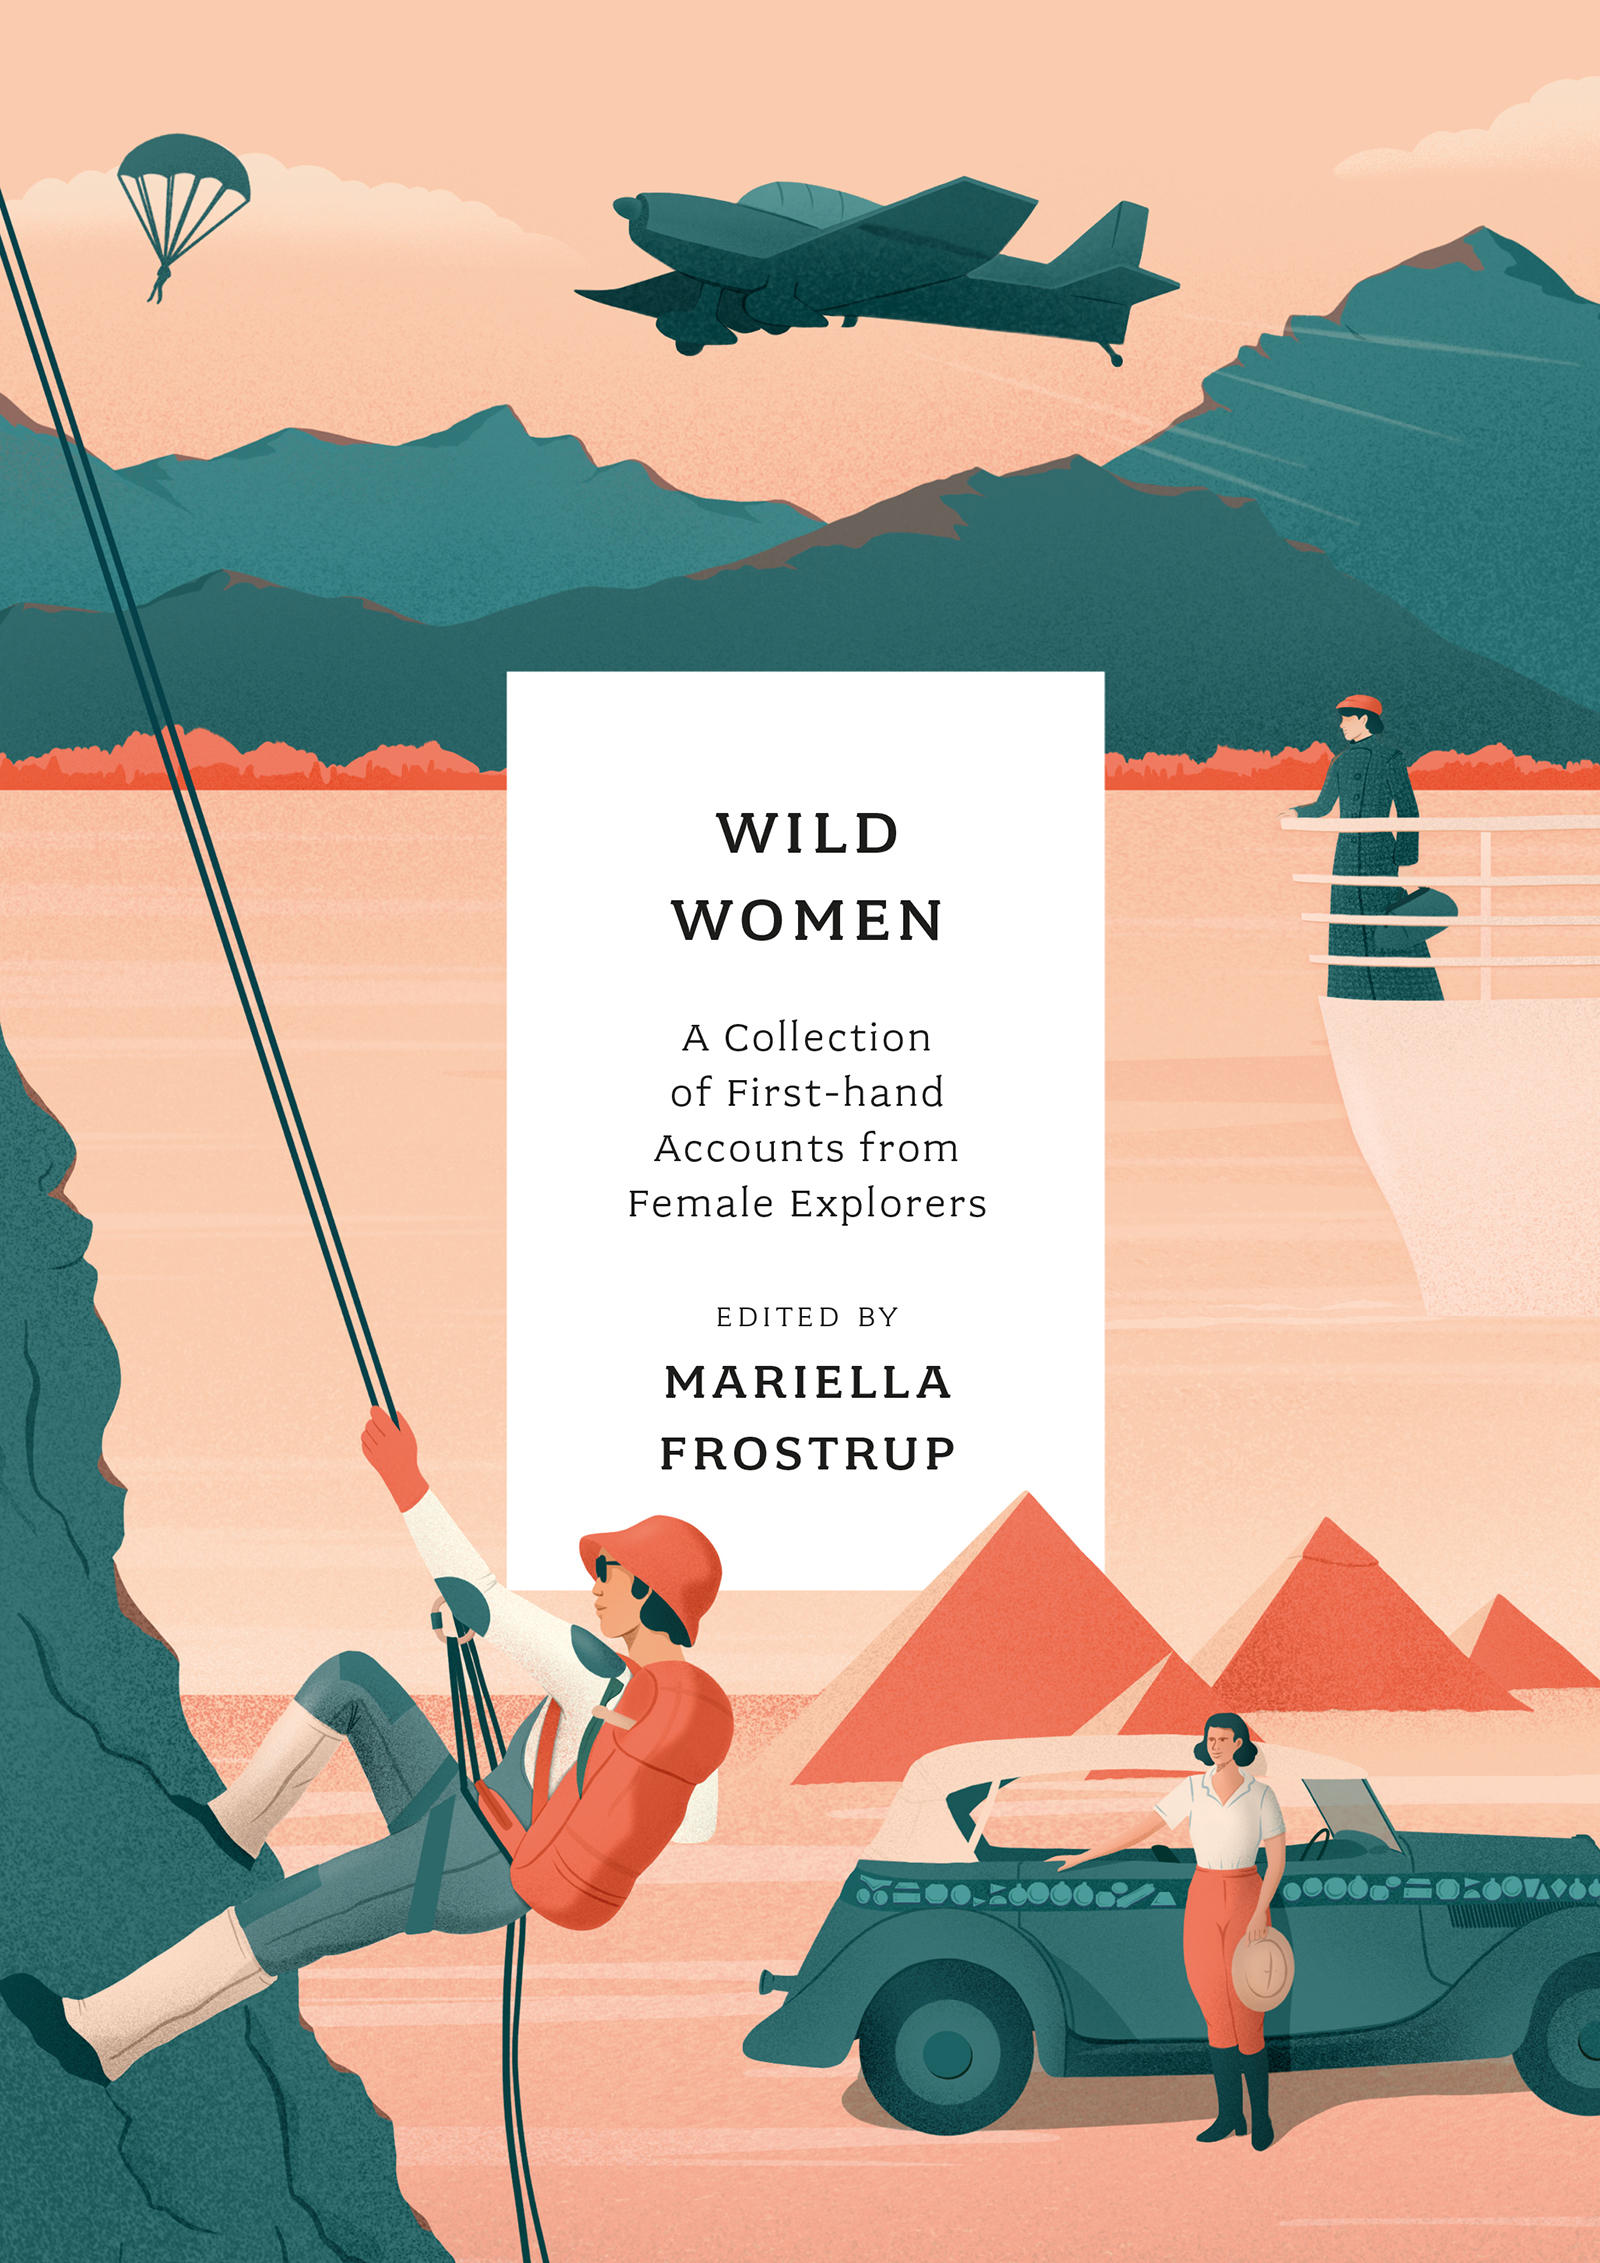 Wild Women: A Collection of First-hand Accounts from Female Explorers